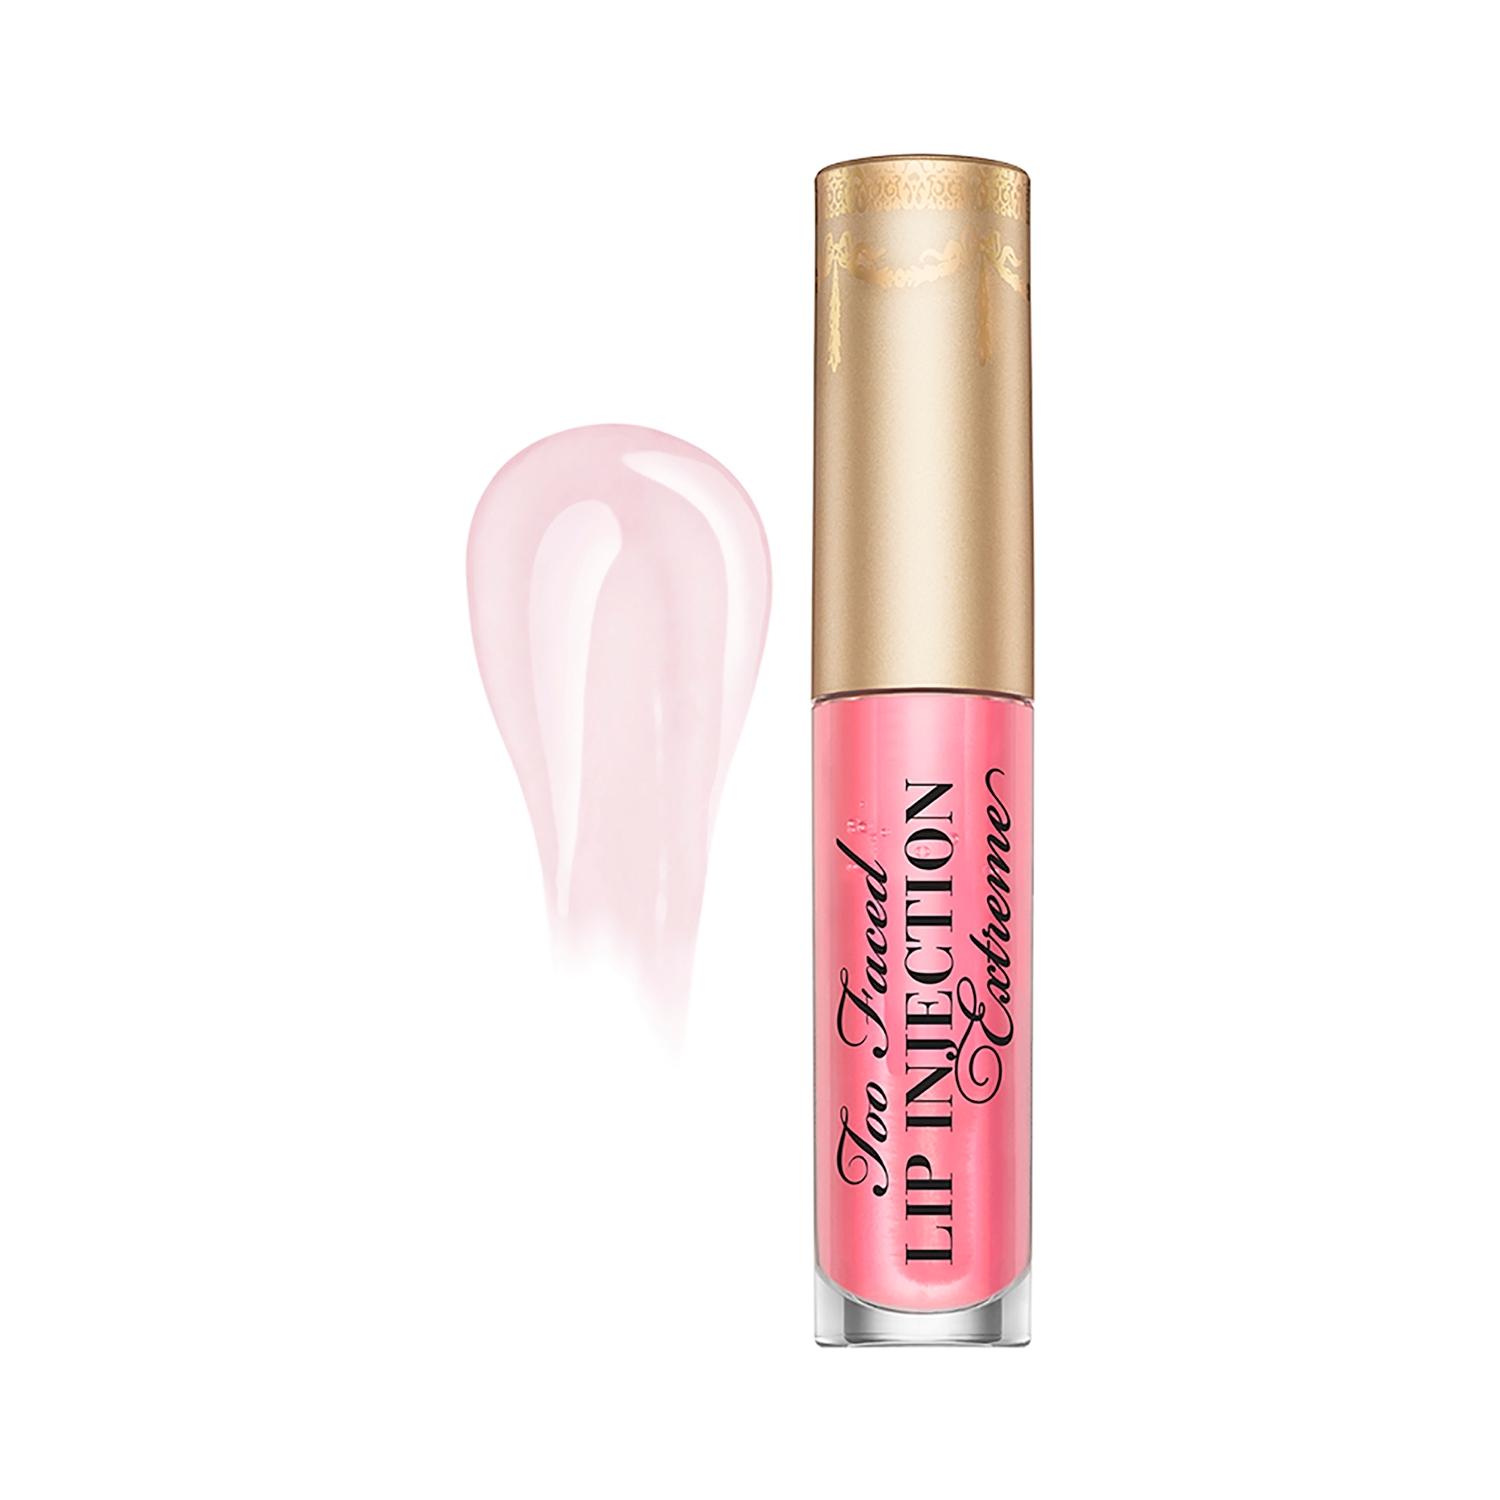 too faced lip injection extreme lip plumper travel size - bubblegum yum (2.8g)